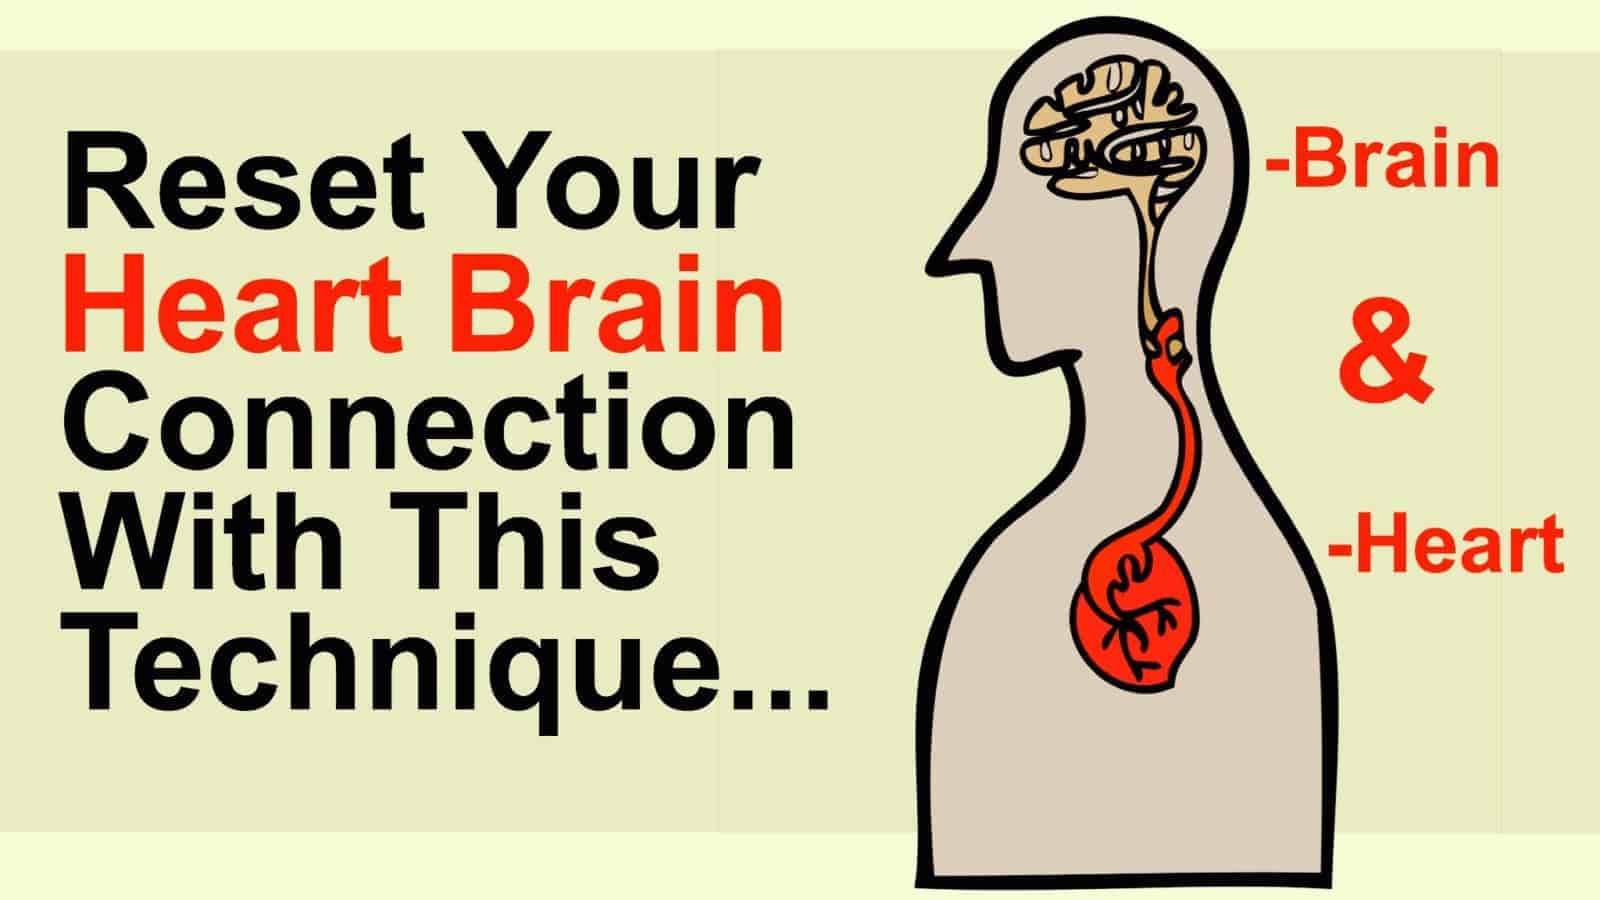 Reset Your “Heart Brain Connection” With This 3 Step Technique